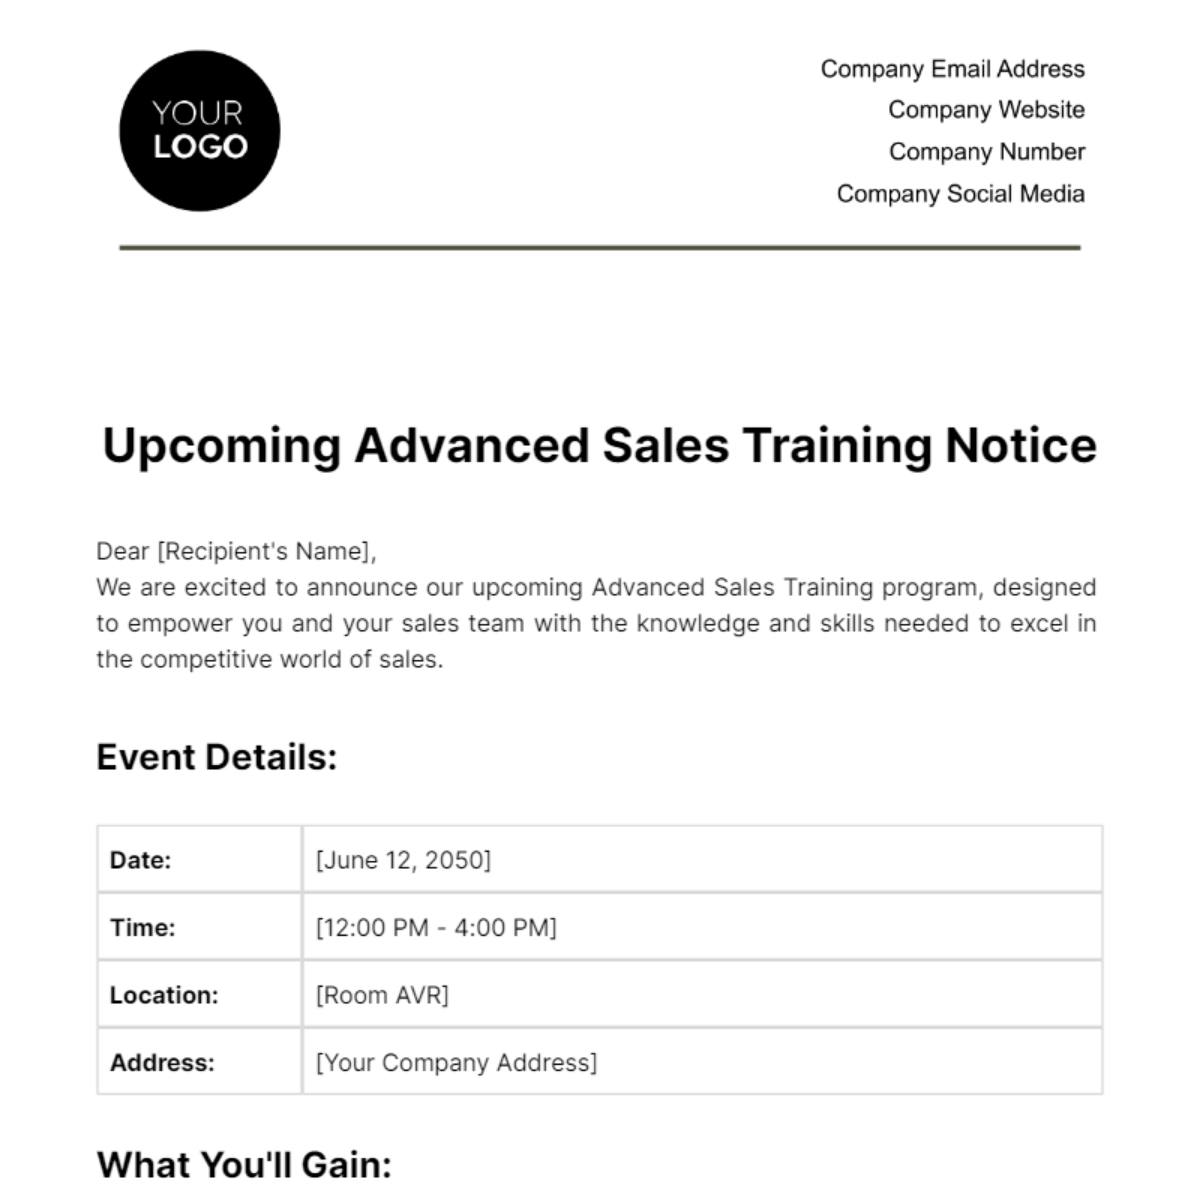 Upcoming Advanced Sales Training Notice Template